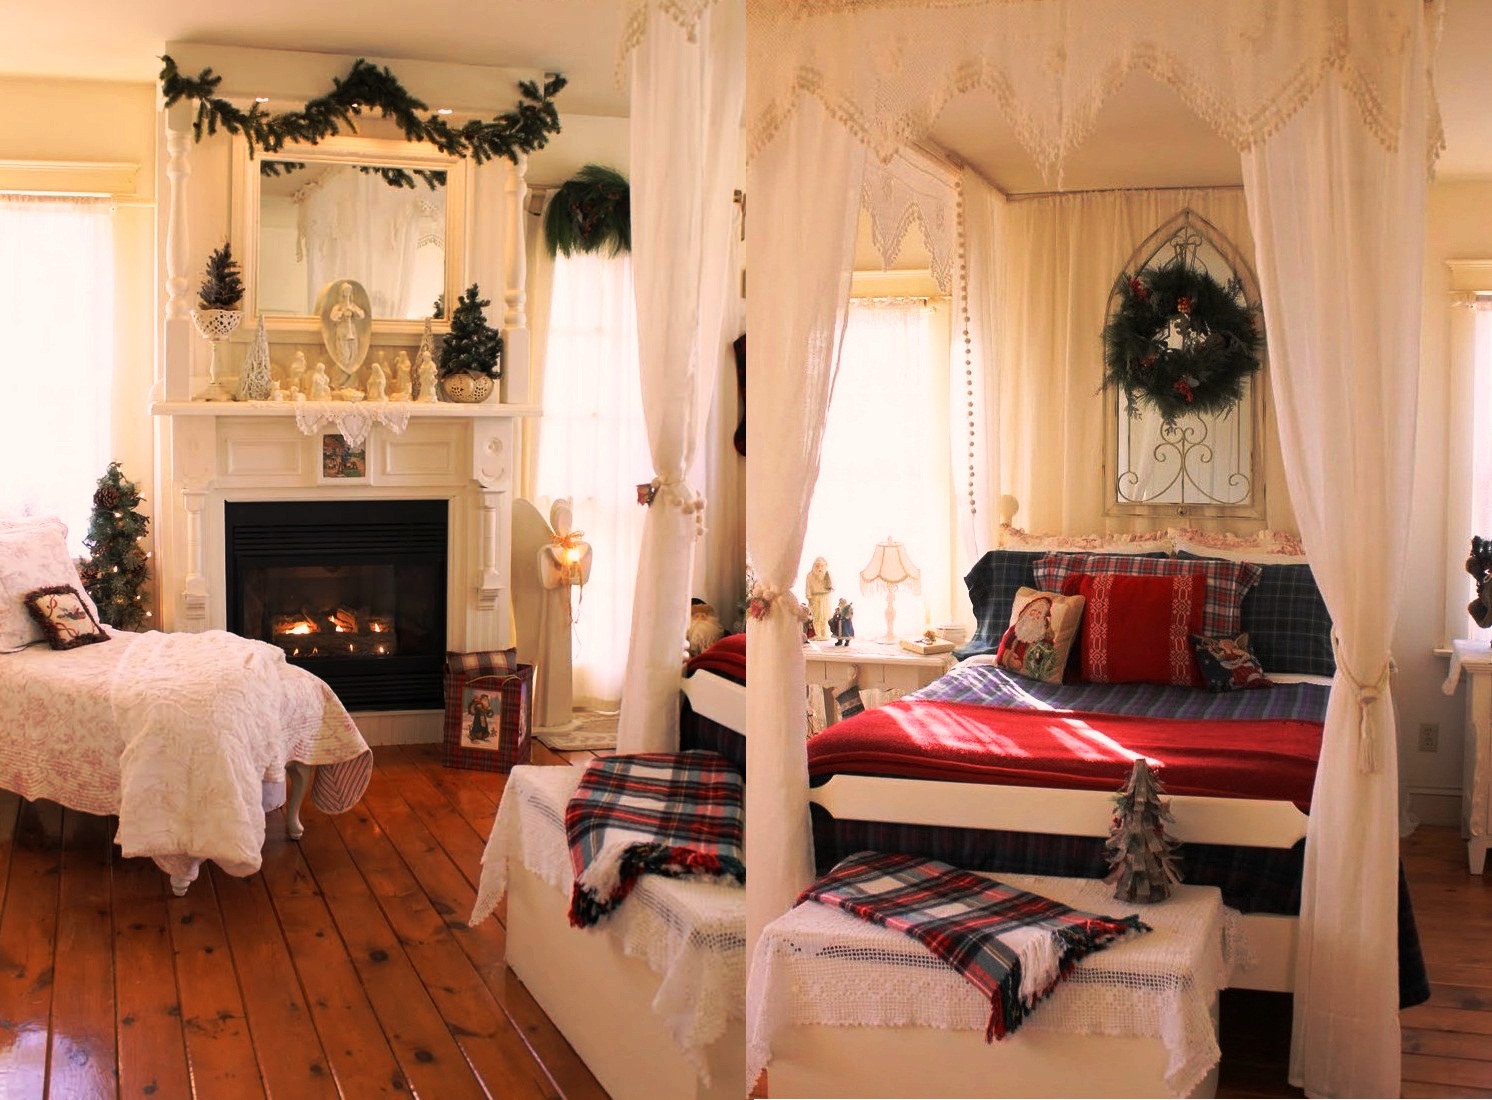 Small Bedroom Christmas Decorations